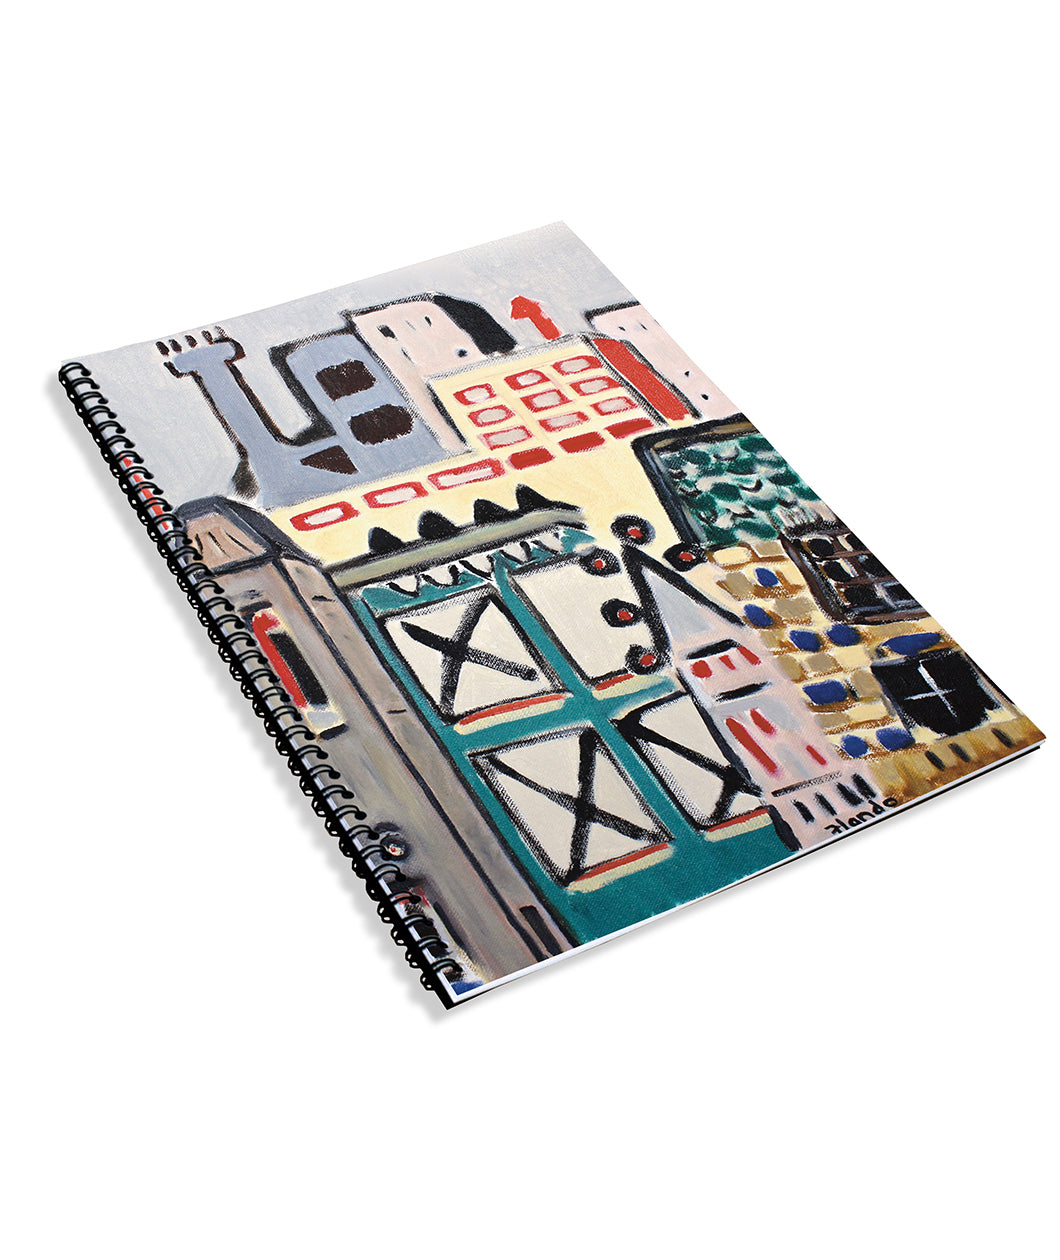 A spiral bound notebook with drawn, colorful buildings on the cover. From Rob Scallon.